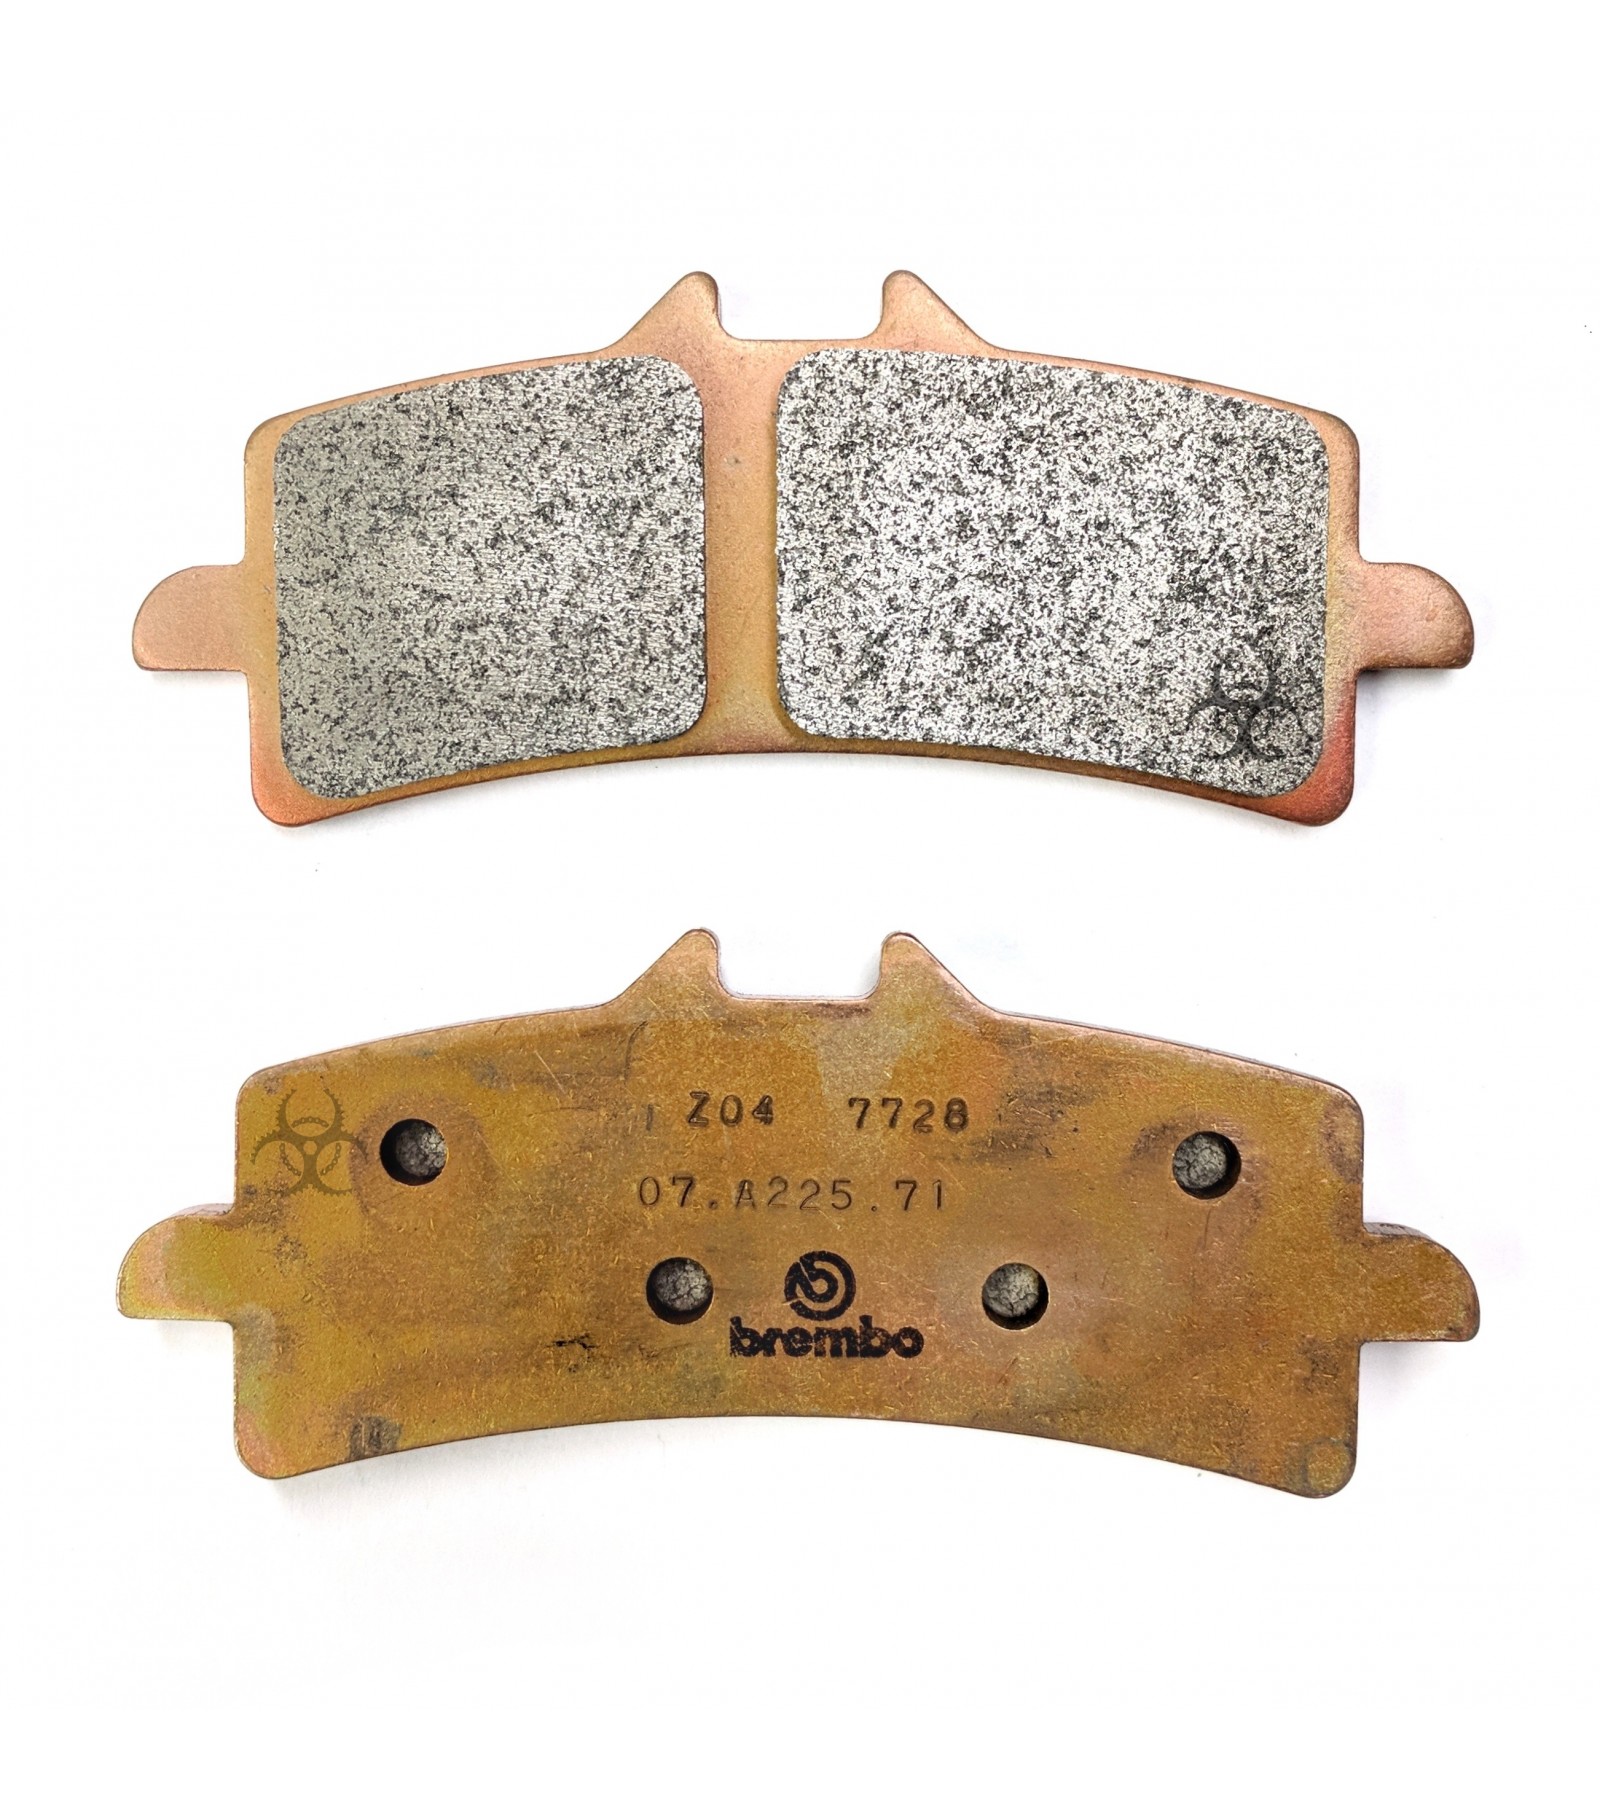 Parts :: Ducati :: 848 / 1098 / 1198 :: Brake / Clutch / Controls :: Brake  Calipers / Pads :: Brembo Z04 Racing Brake Pads for M4 Radial Calipers -  HSBK Racing, Race Team, Training Facility, Exotic Parts